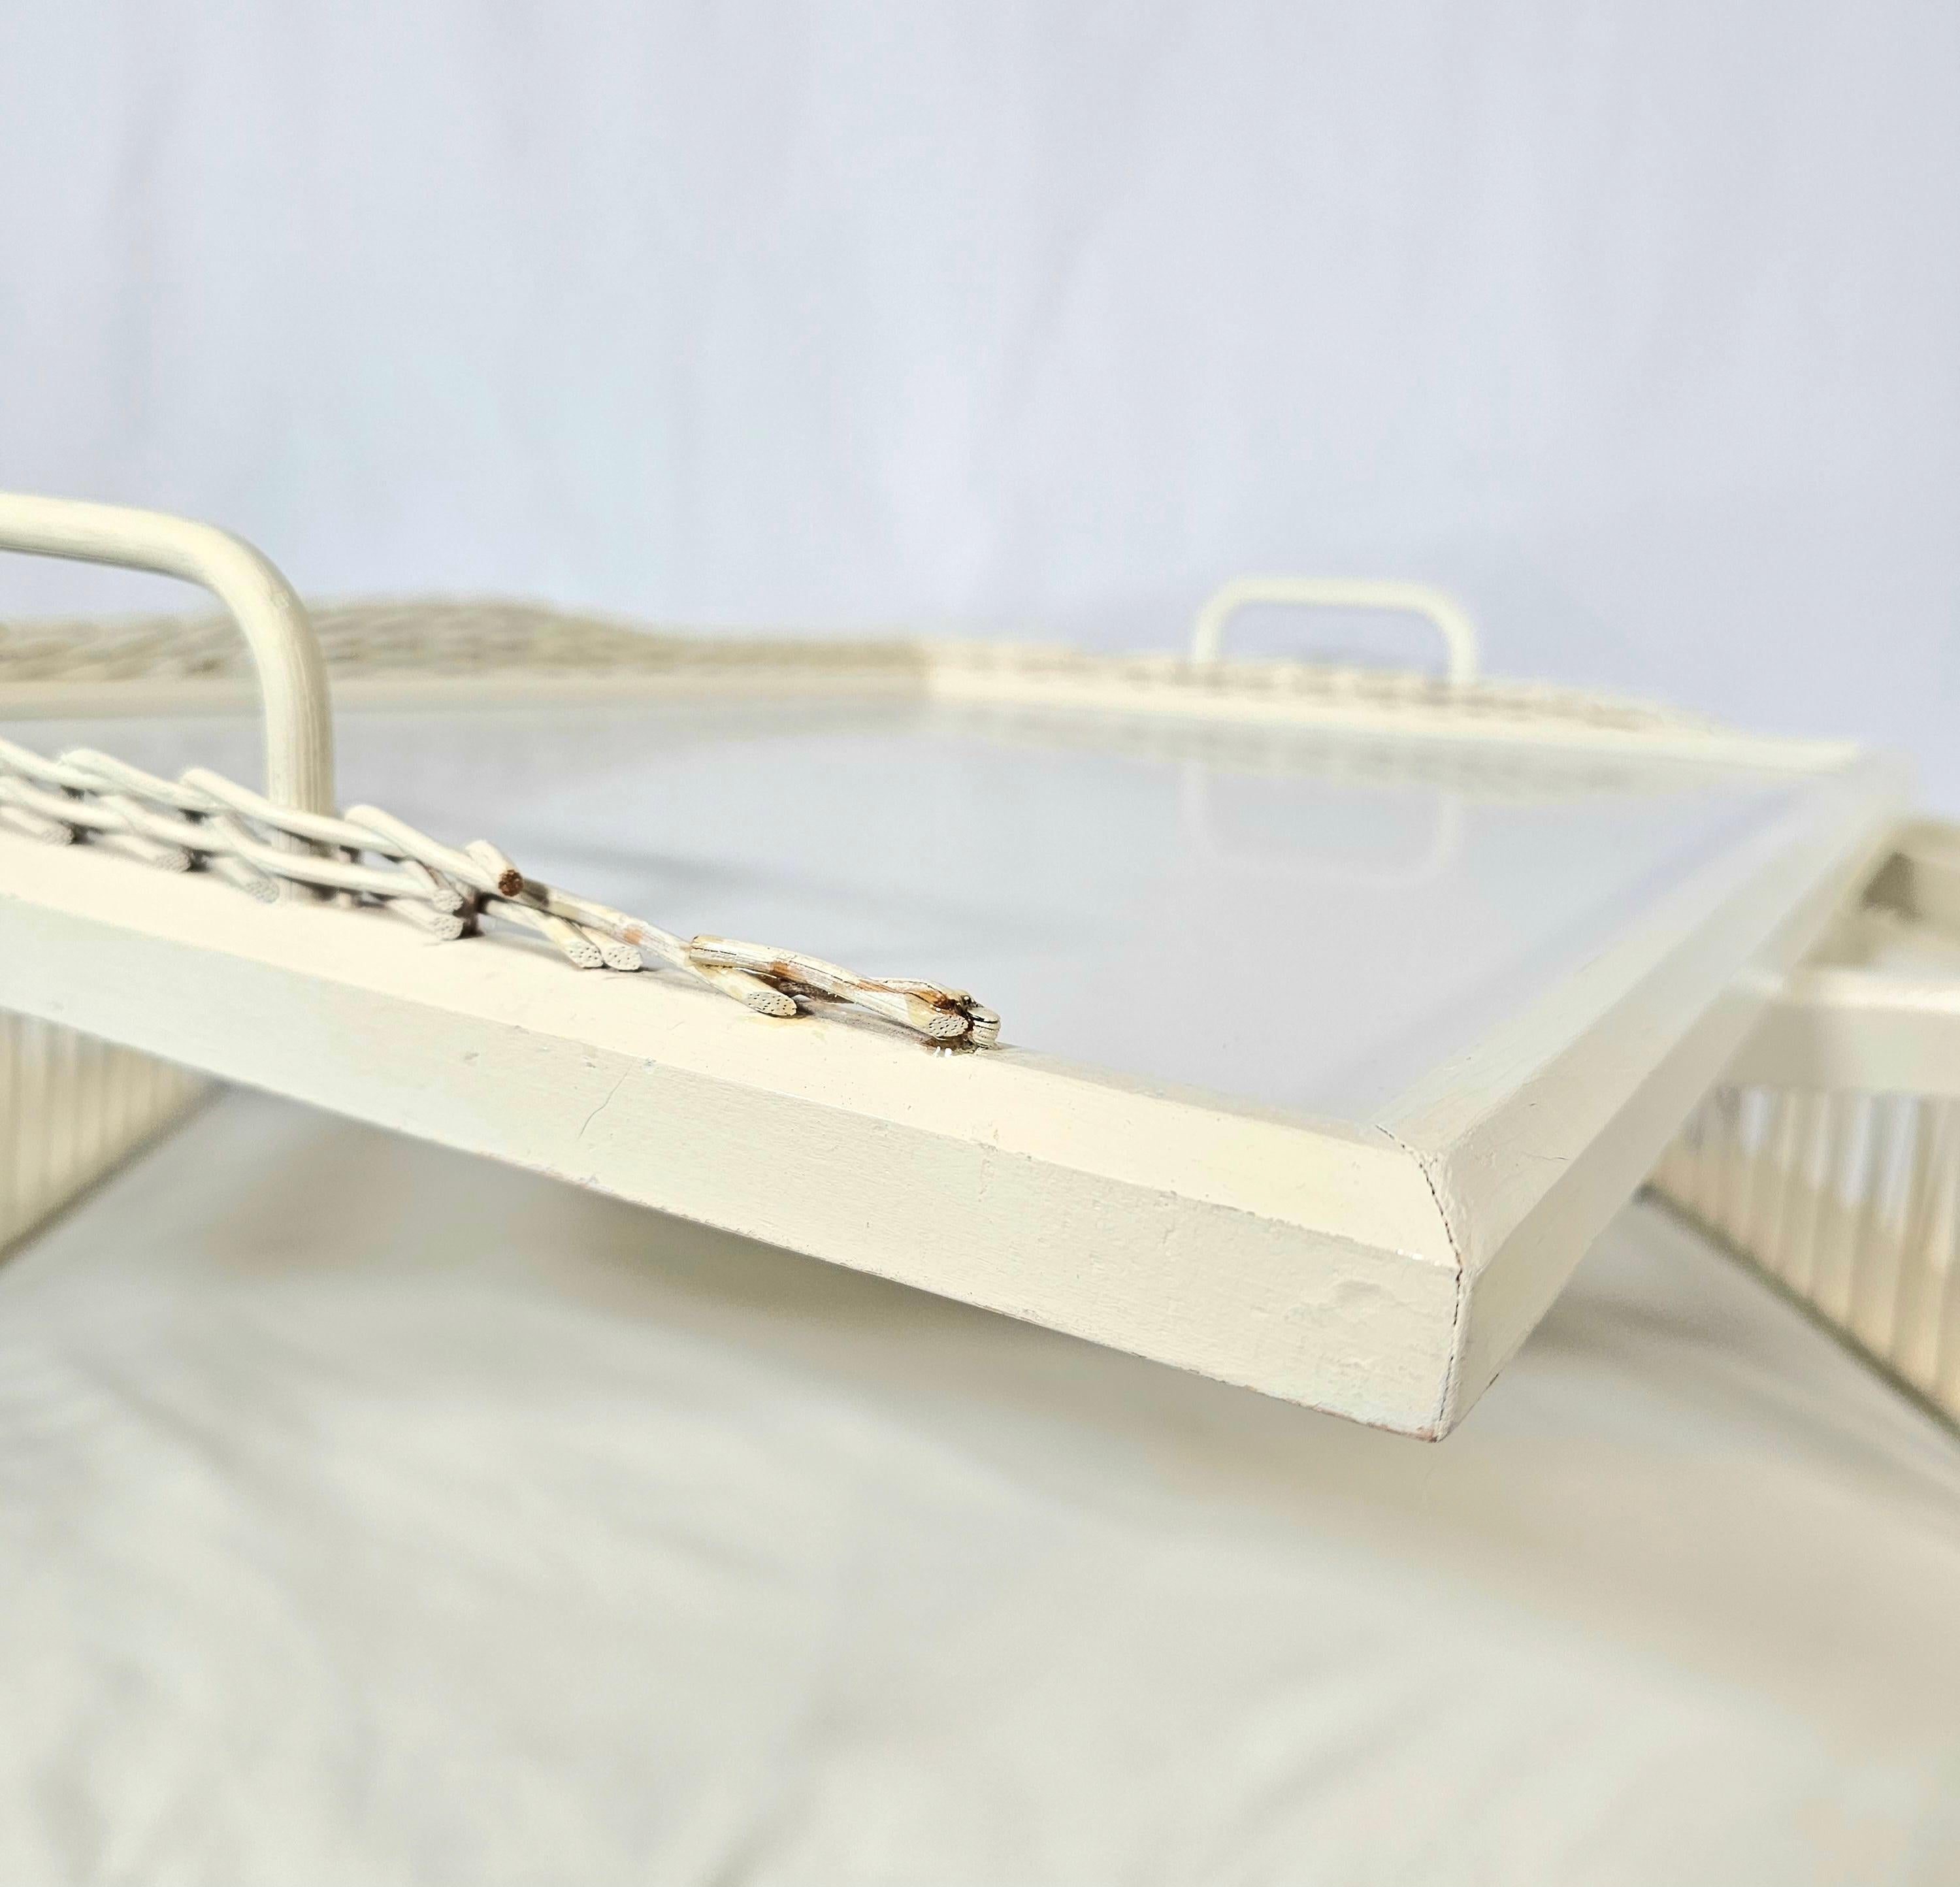 Mid Century Adjustable Wicker Bed Breakfast Tray In Good Condition For Sale In Waxahachie, TX